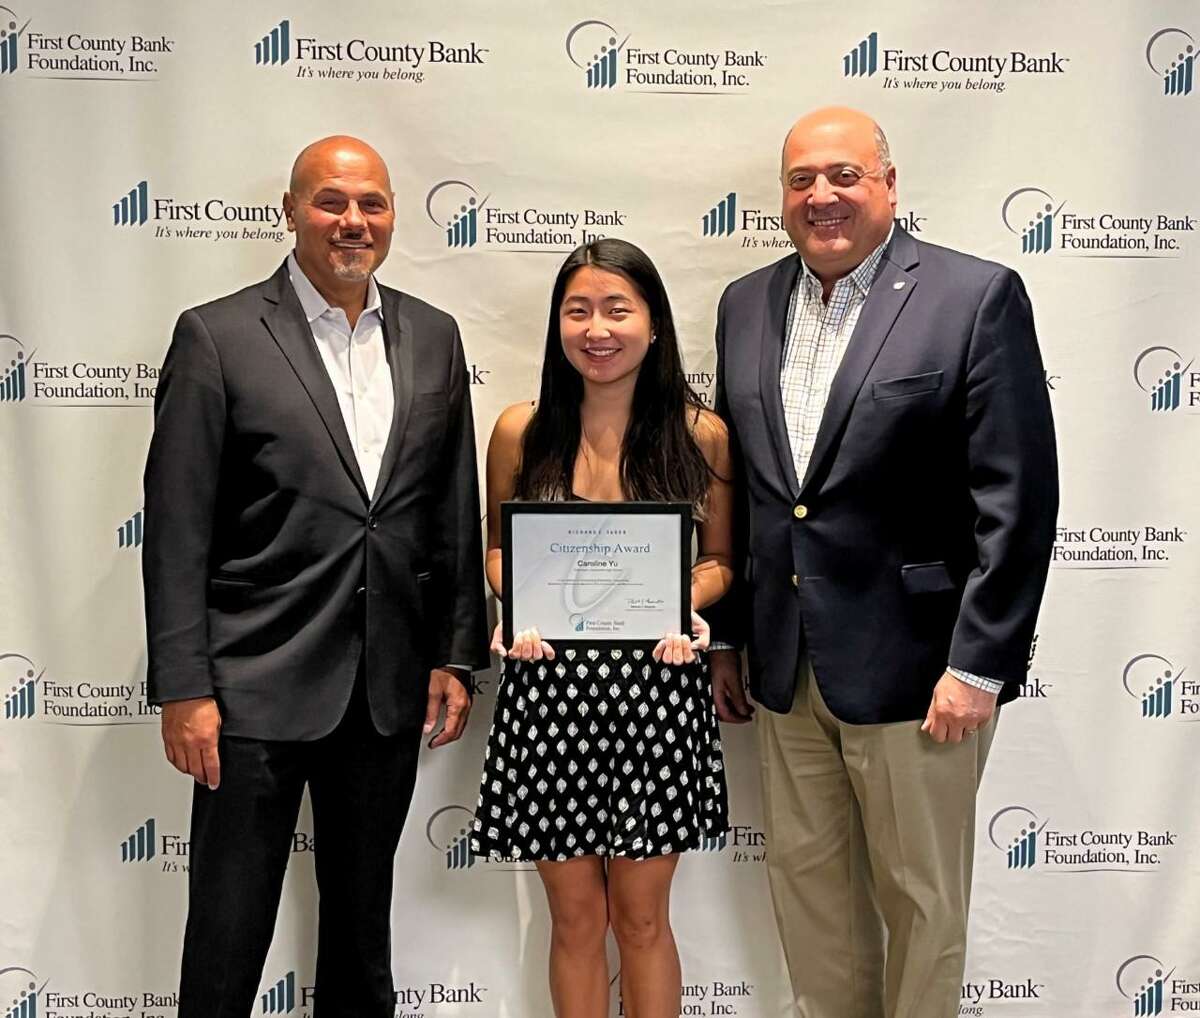 Caroline Yu of Greenwich, center, with Willard Miley, left, president and COO of First County Bank and vice president of First County Bank Foundation; amd Robert J. Granata, right, chairman and CEO of First County Bank and president of First County Bank Foundation.